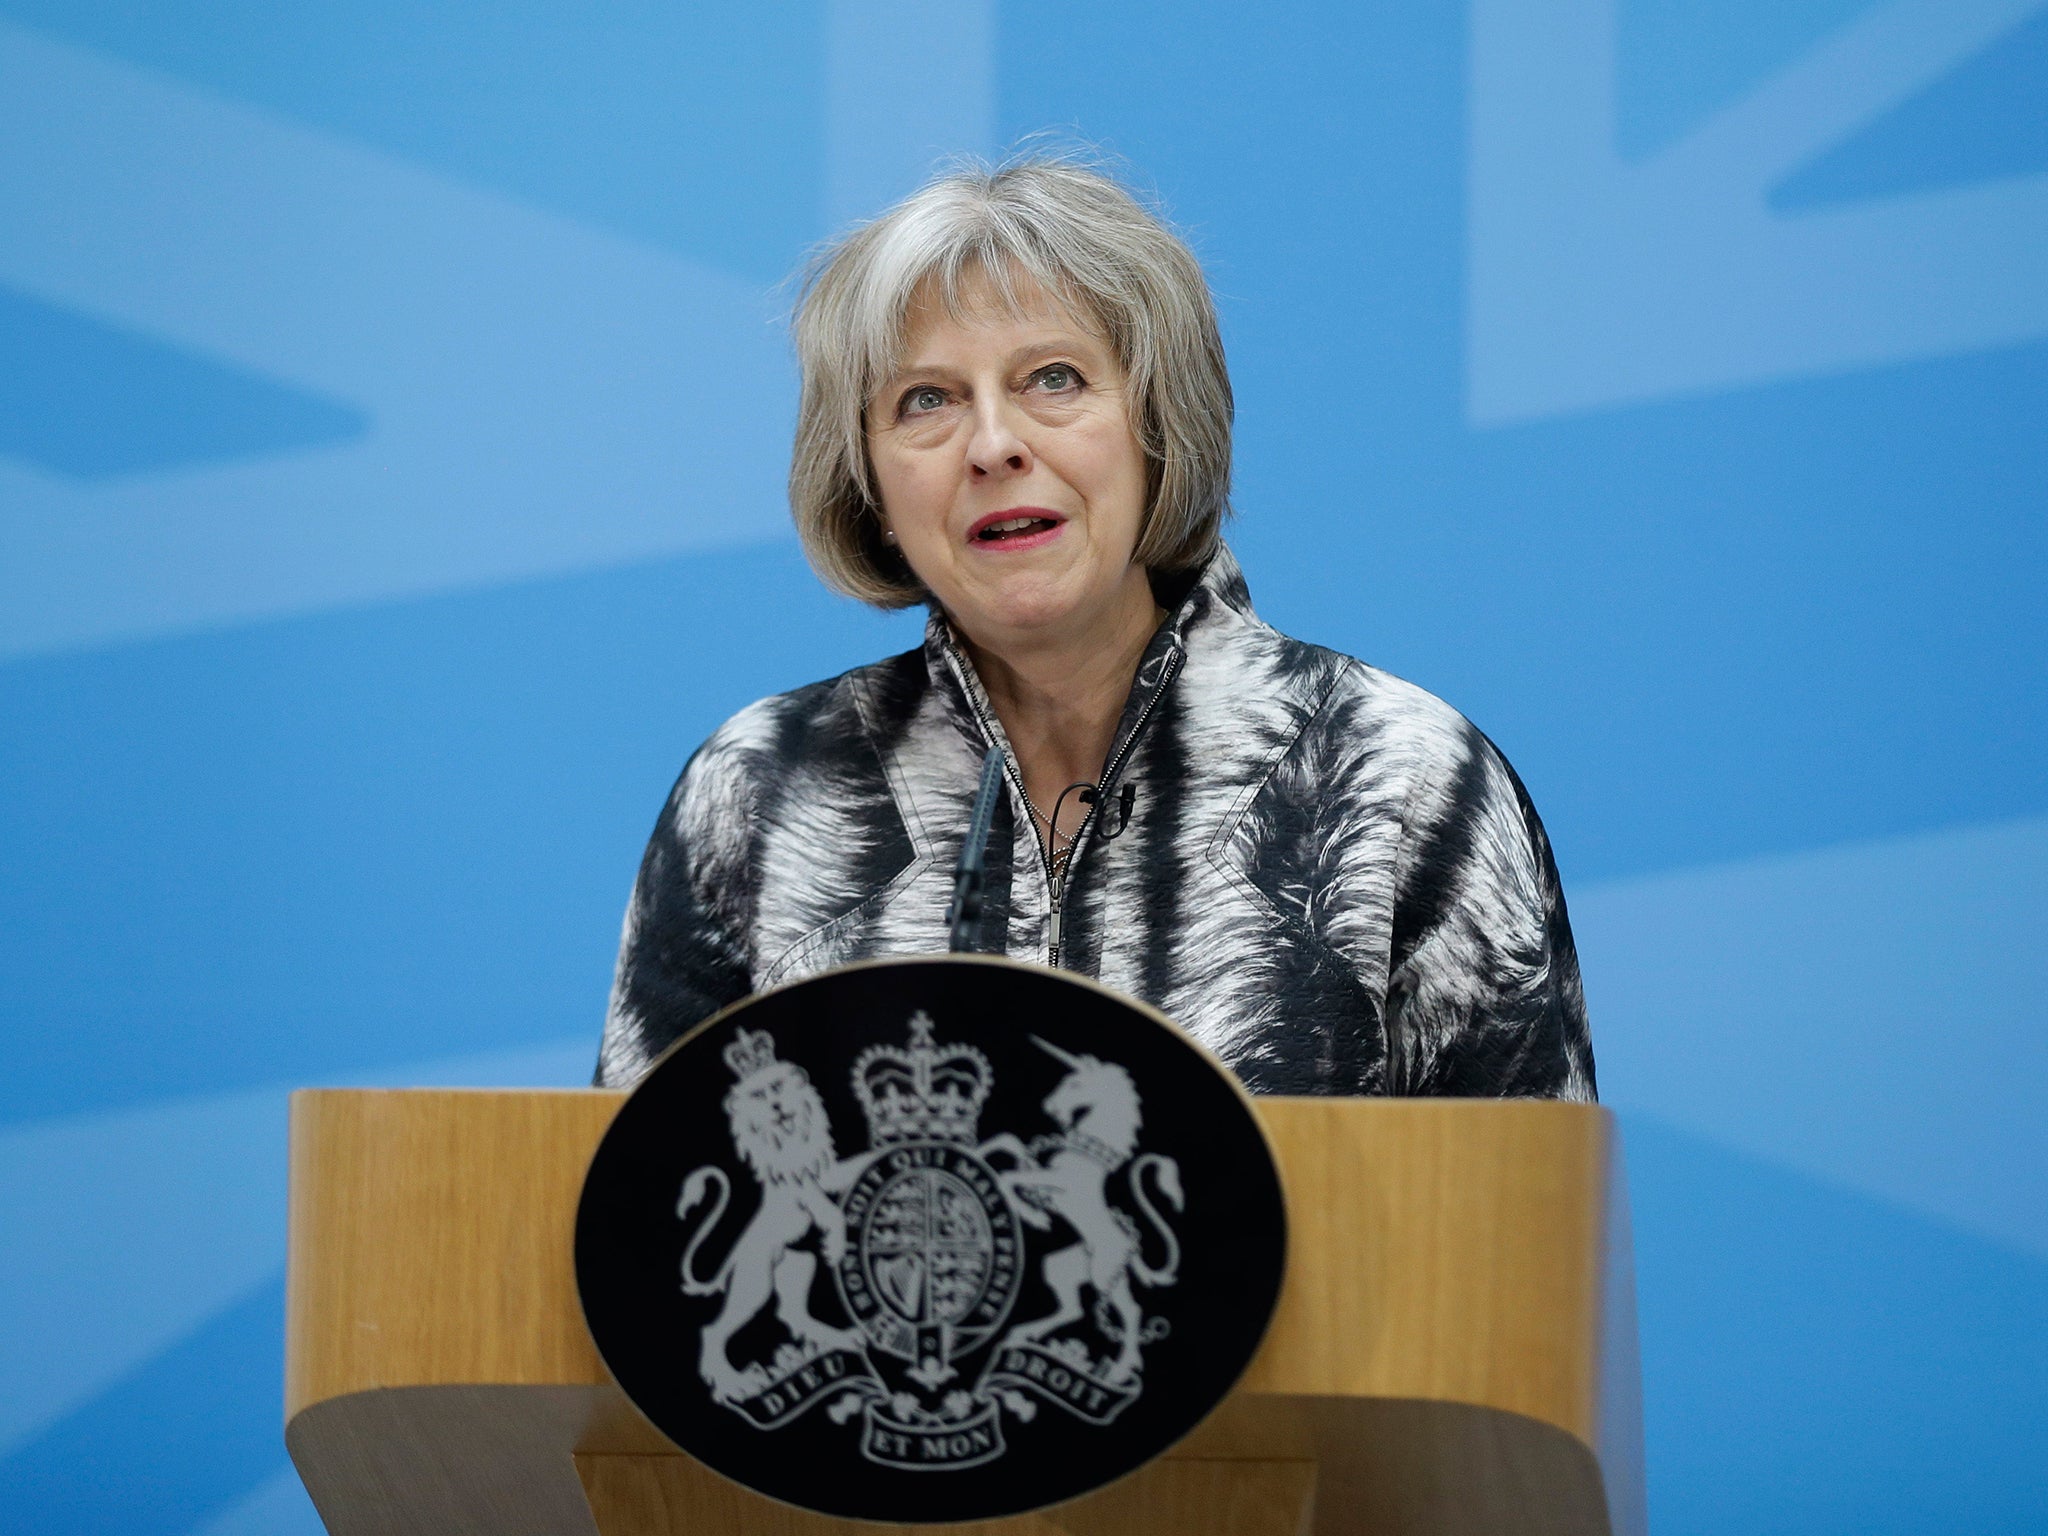 Theresa May pointed to figures showing the net influx of foreign students into the UK was 50,000 last year